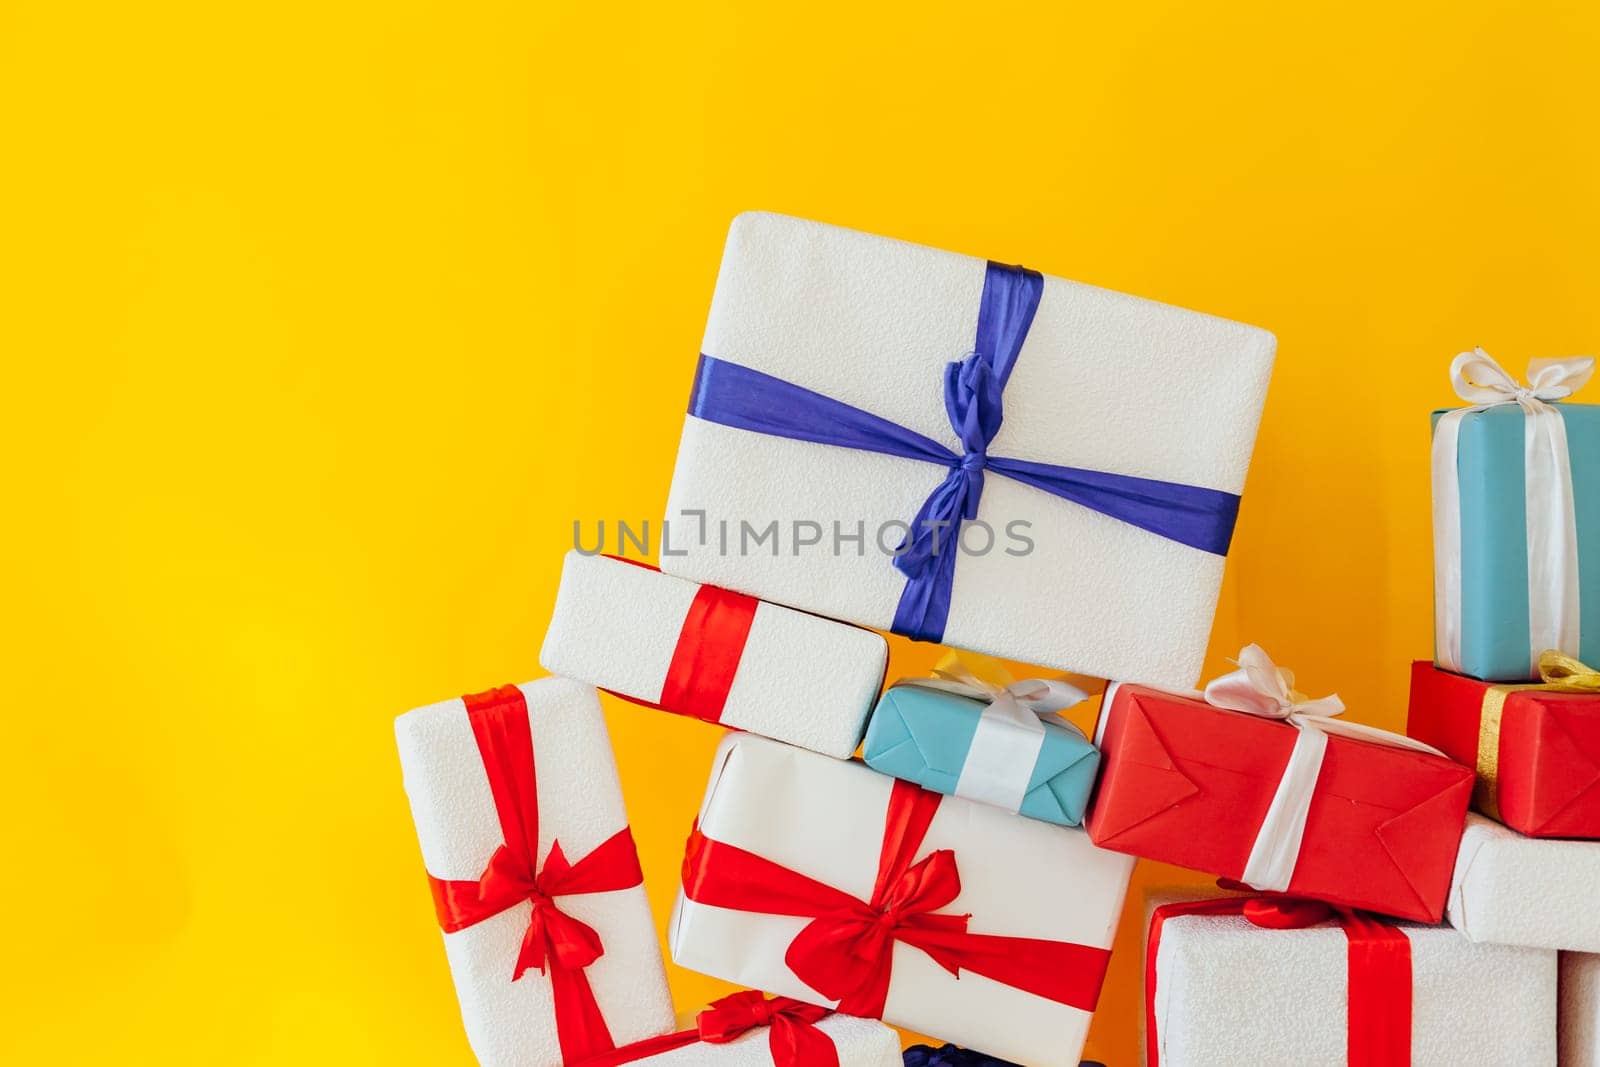 birthday or Christmas presents on a yellow background by Simakov